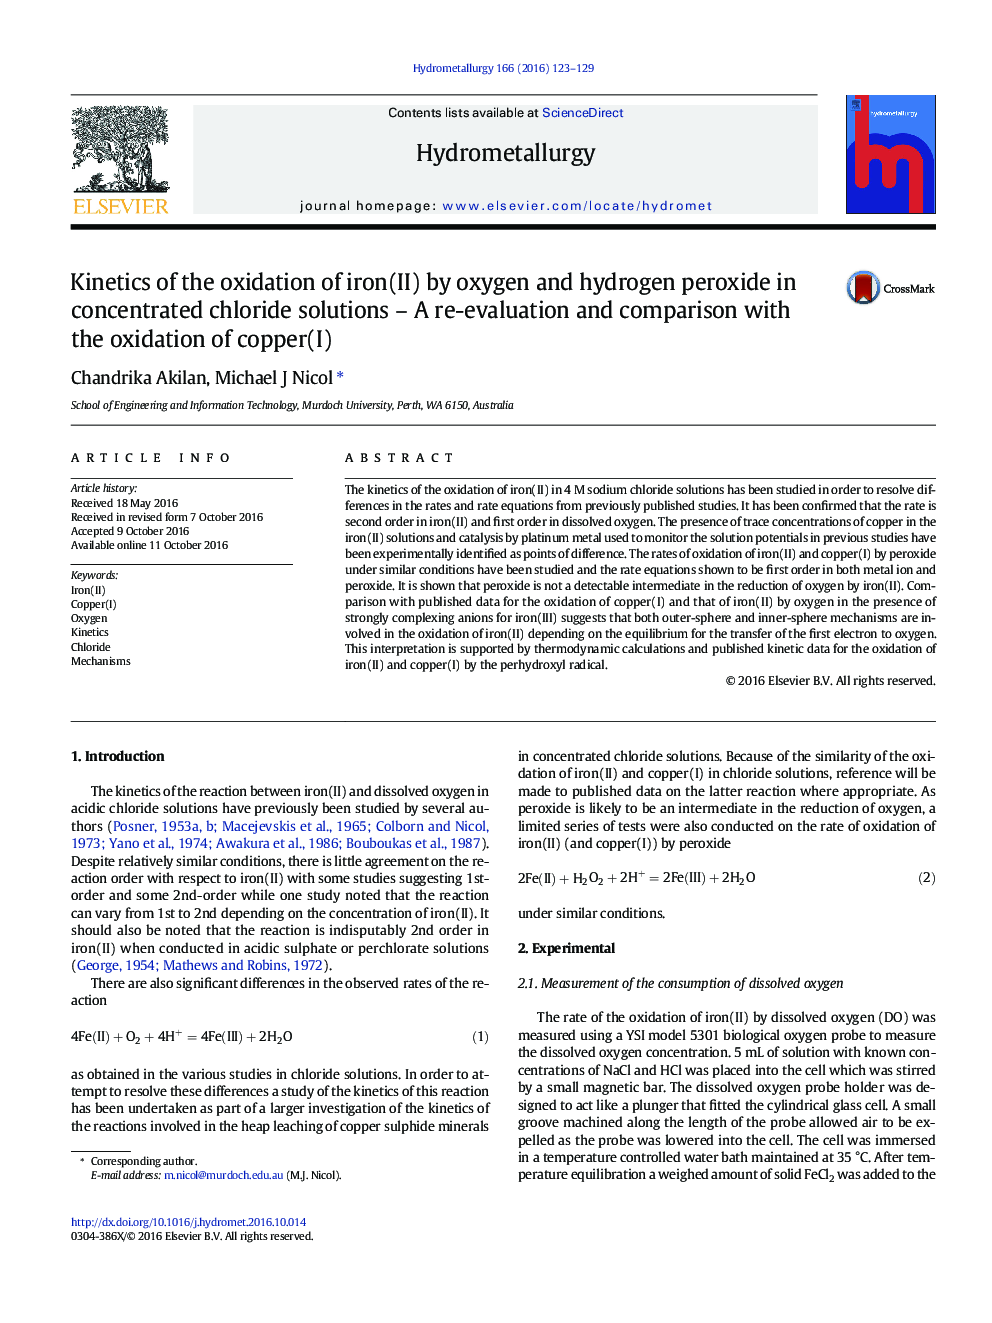 Kinetics of the oxidation of iron(II) by oxygen and hydrogen peroxide in concentrated chloride solutions - A re-evaluation and comparison with the oxidation of copper(I)